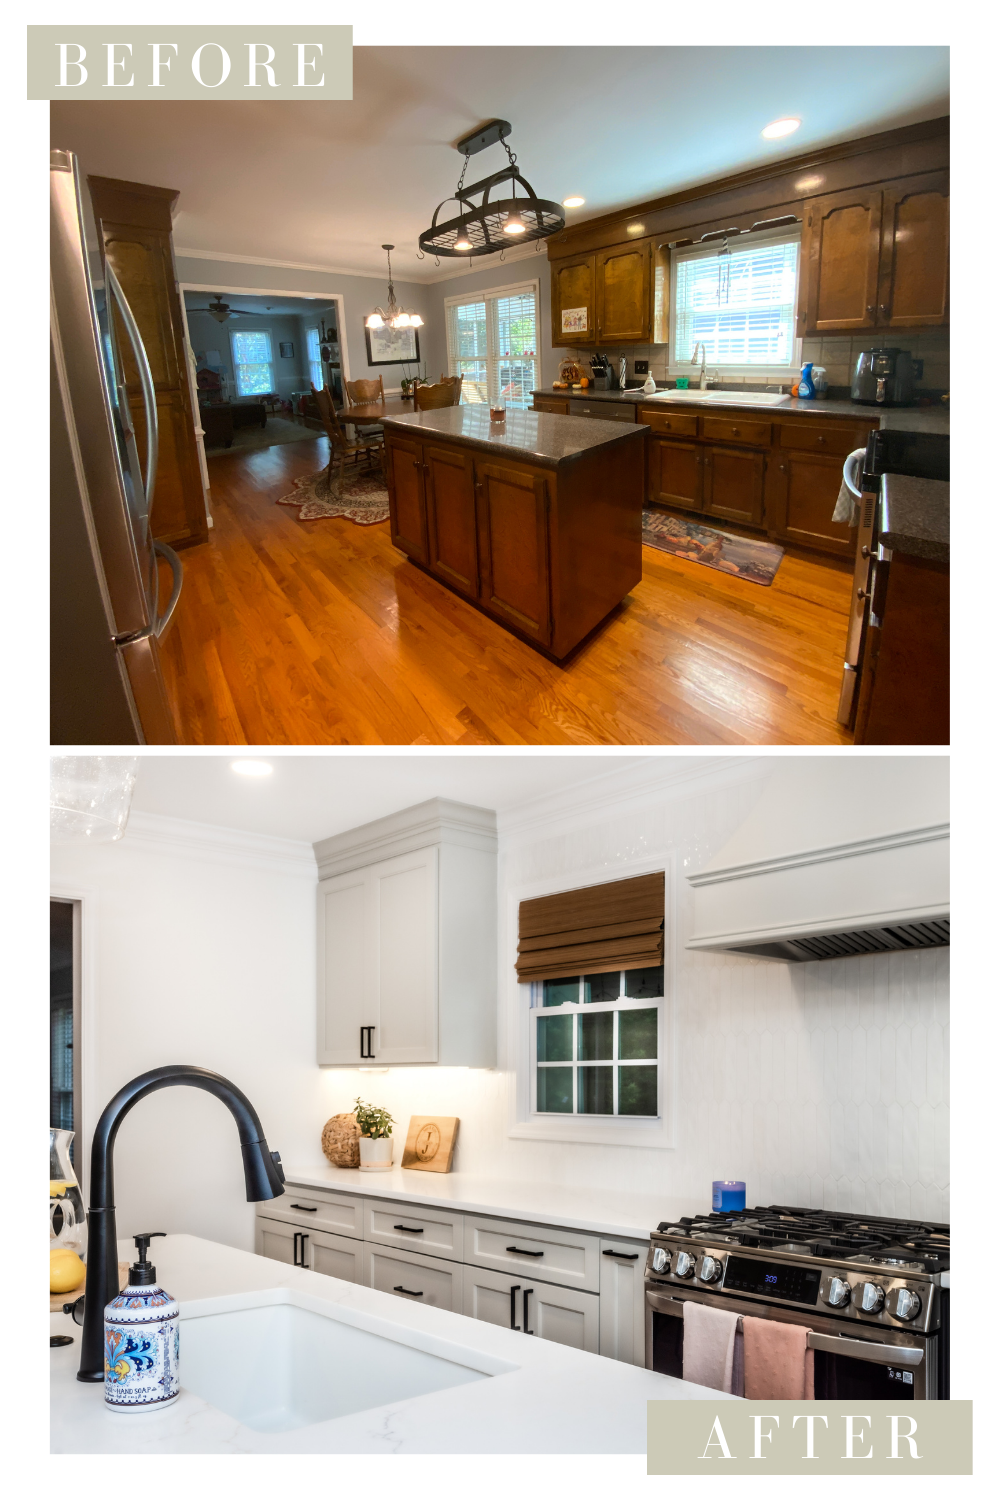  Before and after of a custom kitchen renovation  